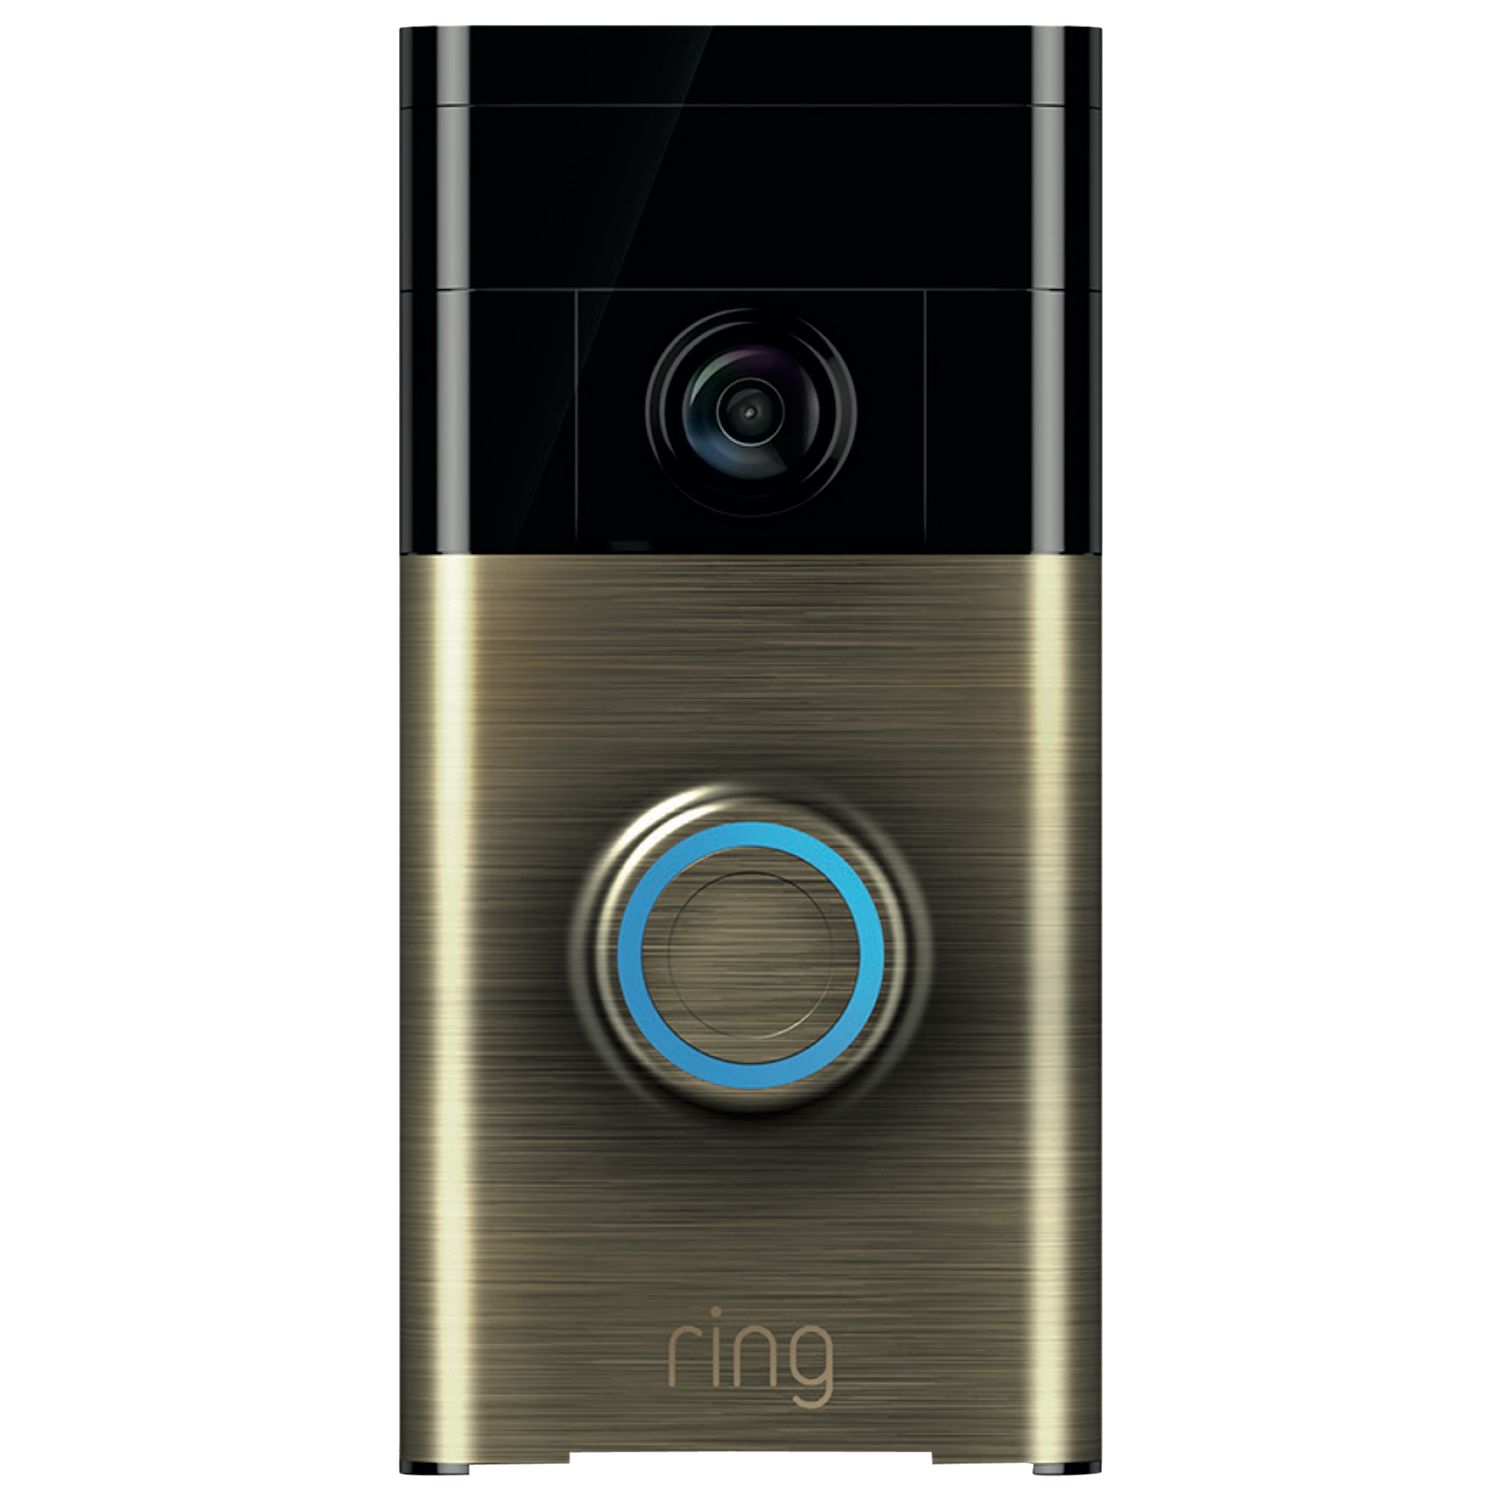 Ring Smart Video Doorbell with Built-in Wi-Fi & Camera